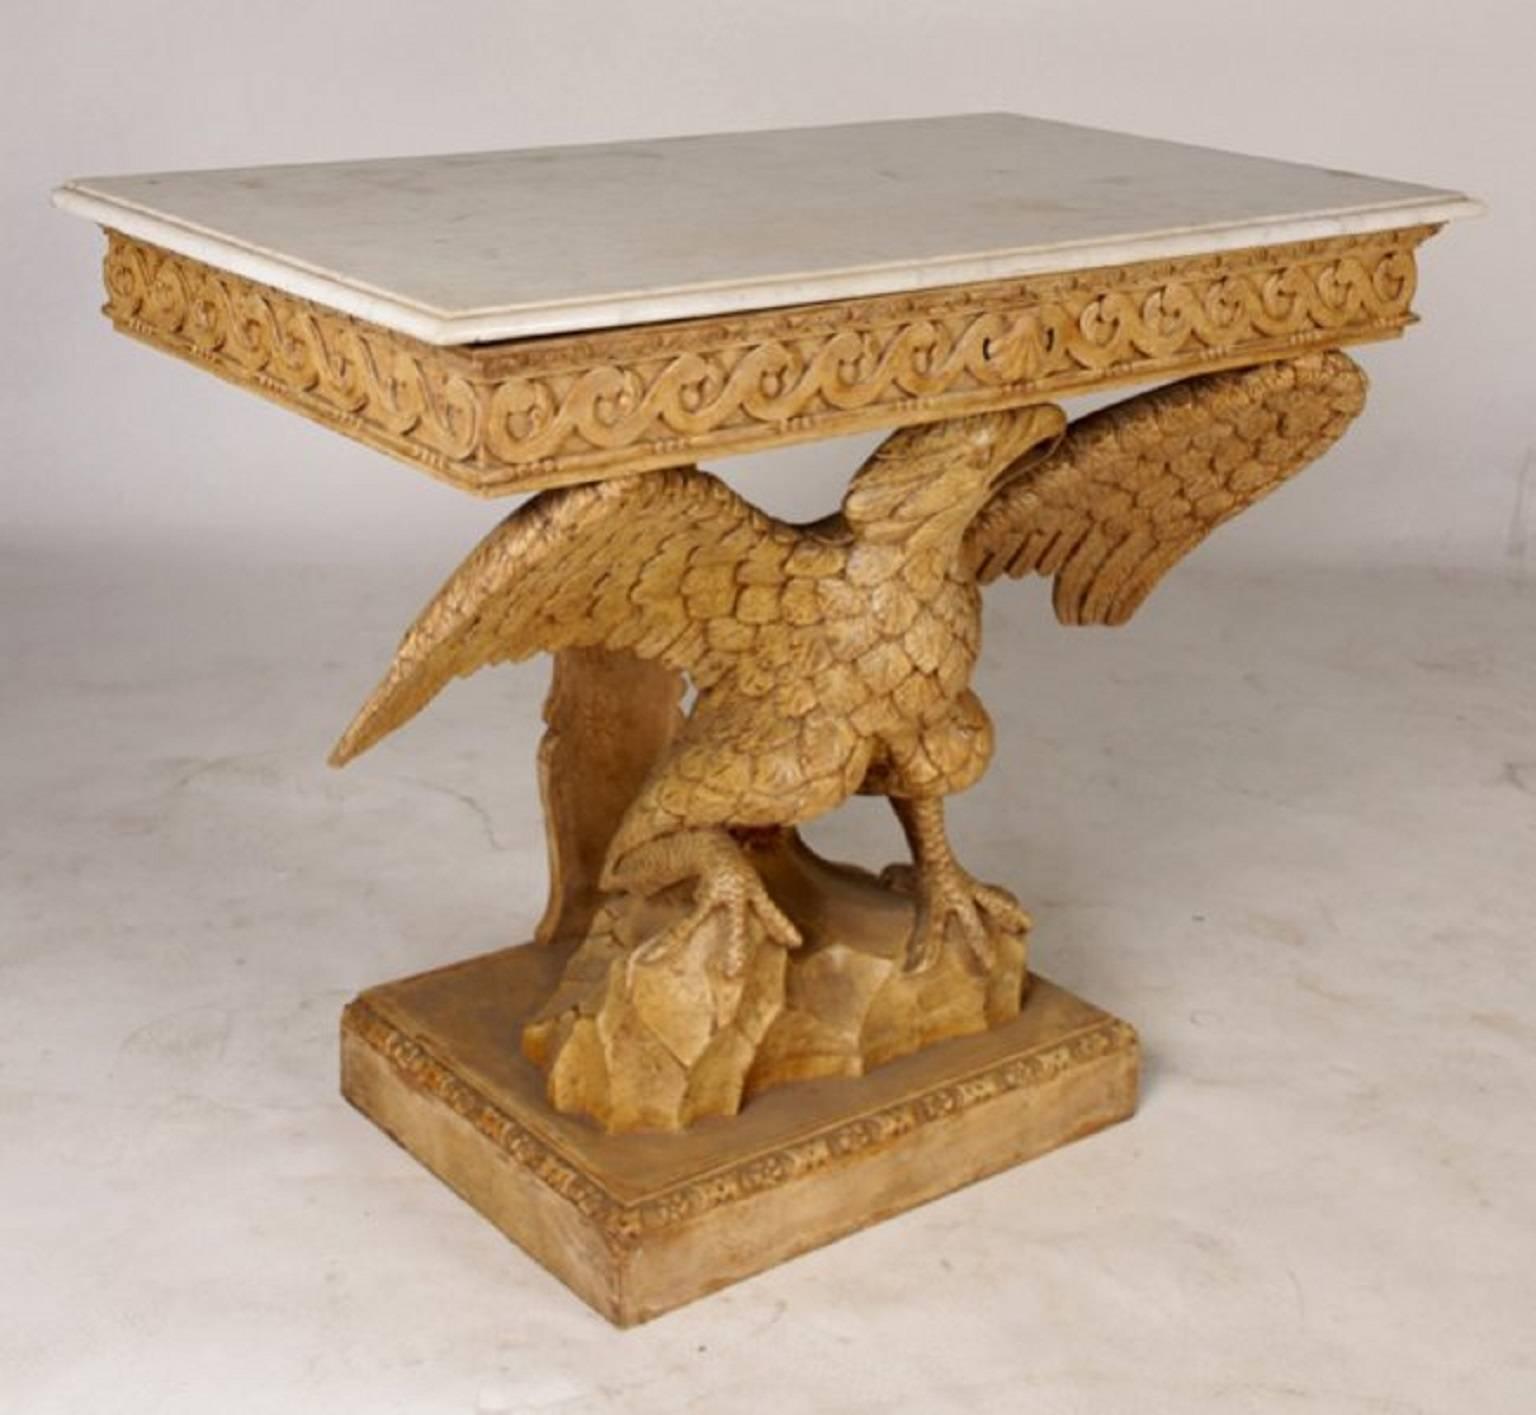 Carved wood eagle console with molded edge marble top over carved apron supported by a spread wing eagle. 

Supported on rusticated base and raised plinth.

A truly wonderful piece!